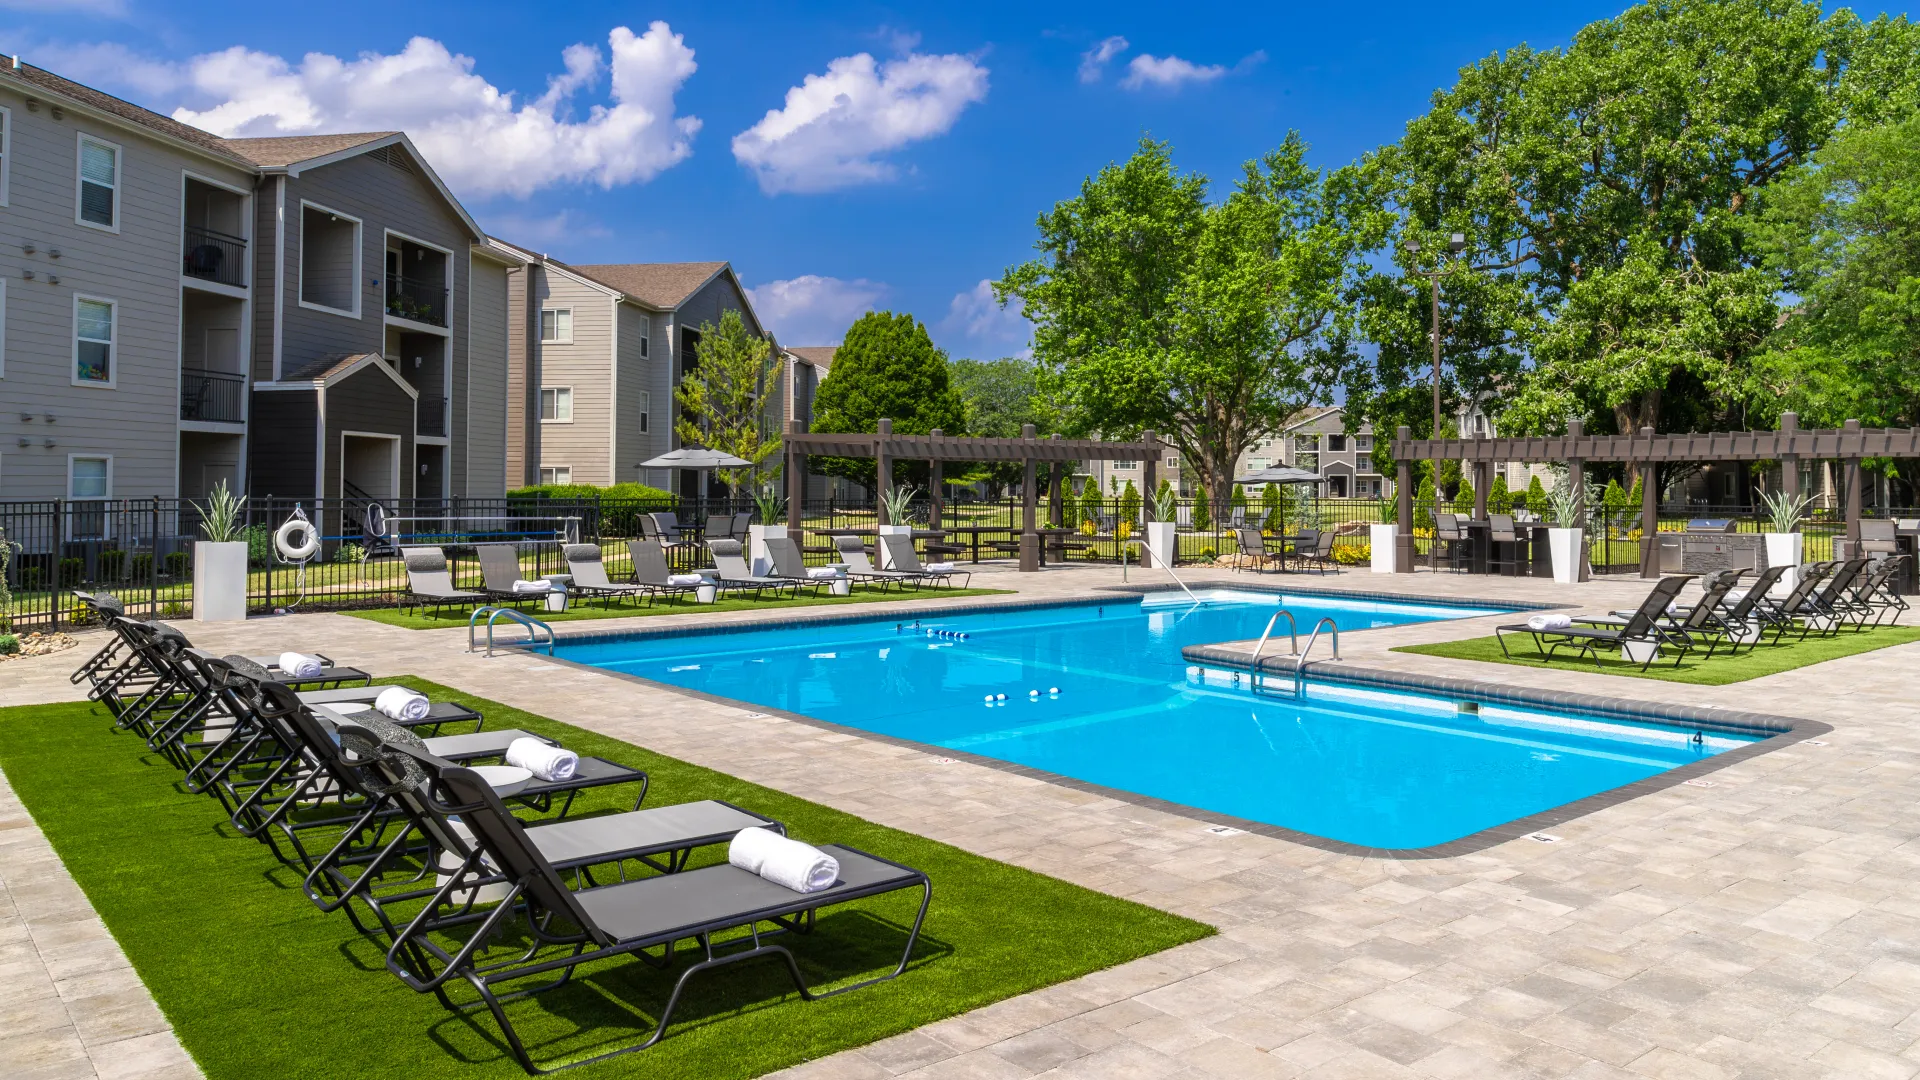 Poolside area with a blue pool, surrounded by lounge chairs, shaded pergolas, grilling stations, and beautifully landscaped apartment buildings in the background.